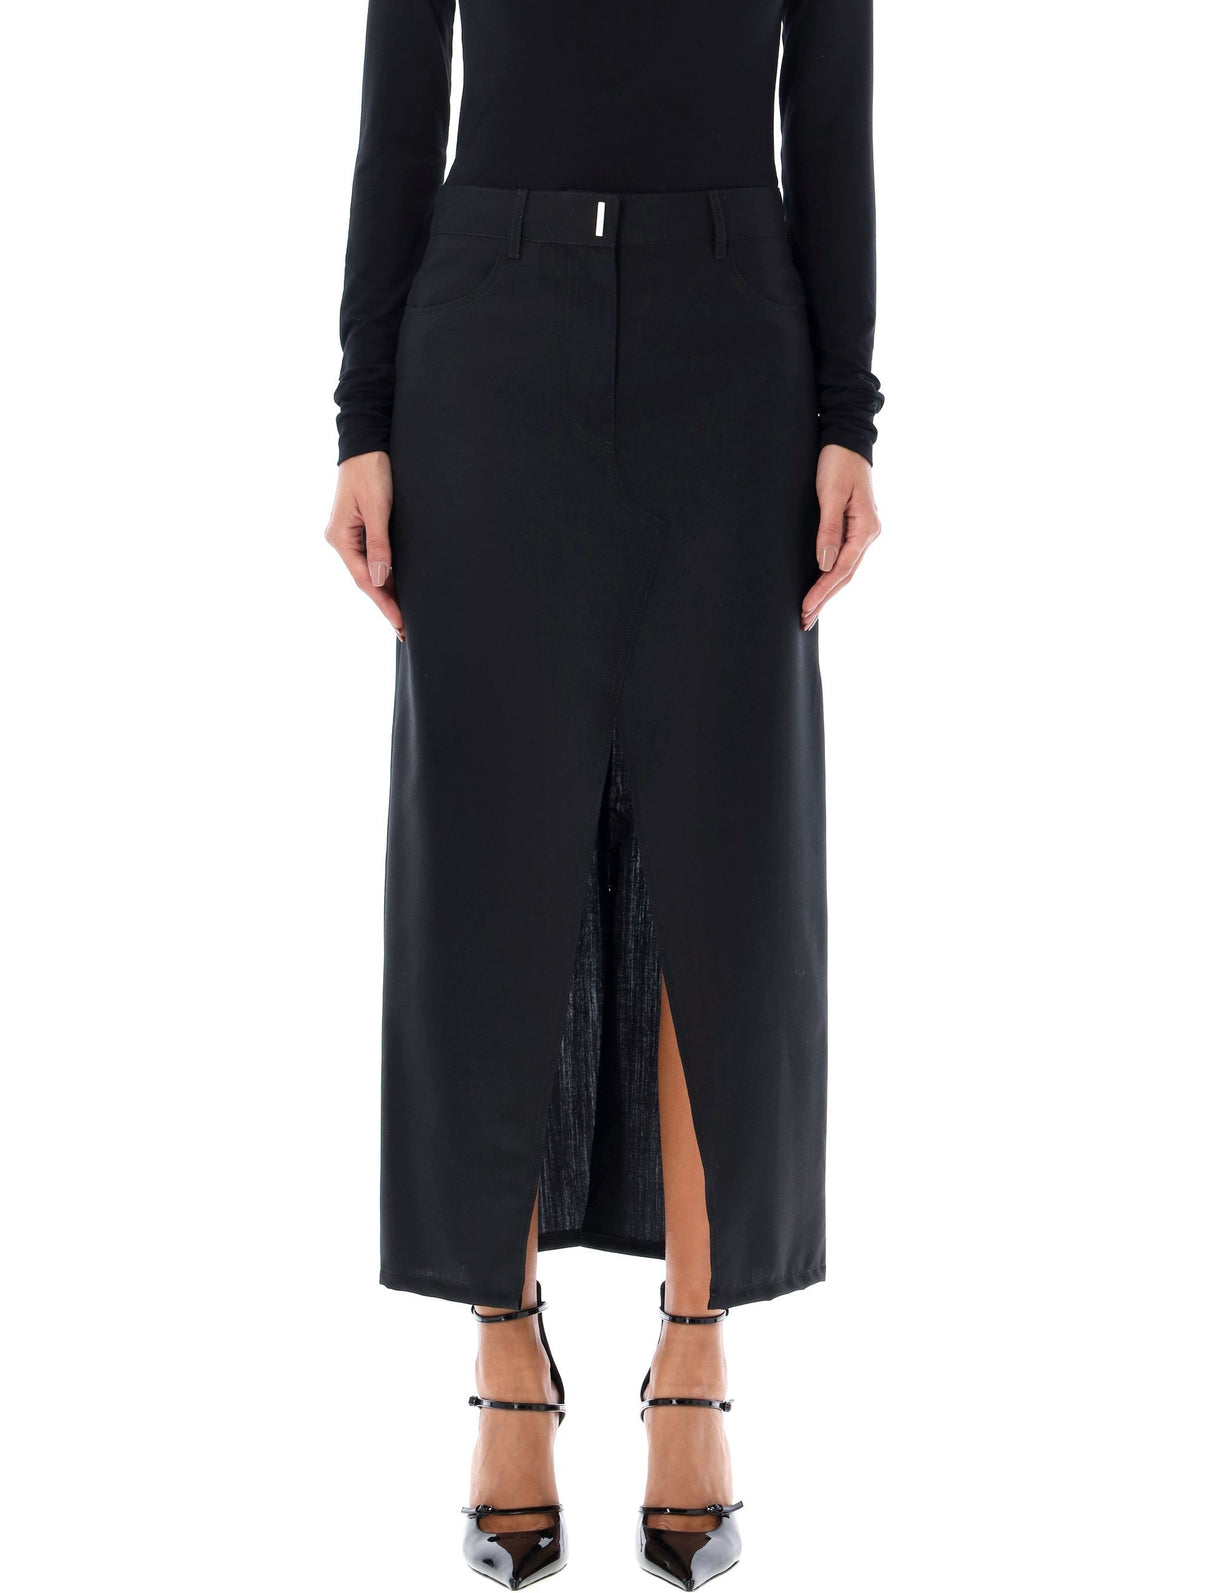 Women's High-Waist Wool and Mohair Skirt by FW23 Collection